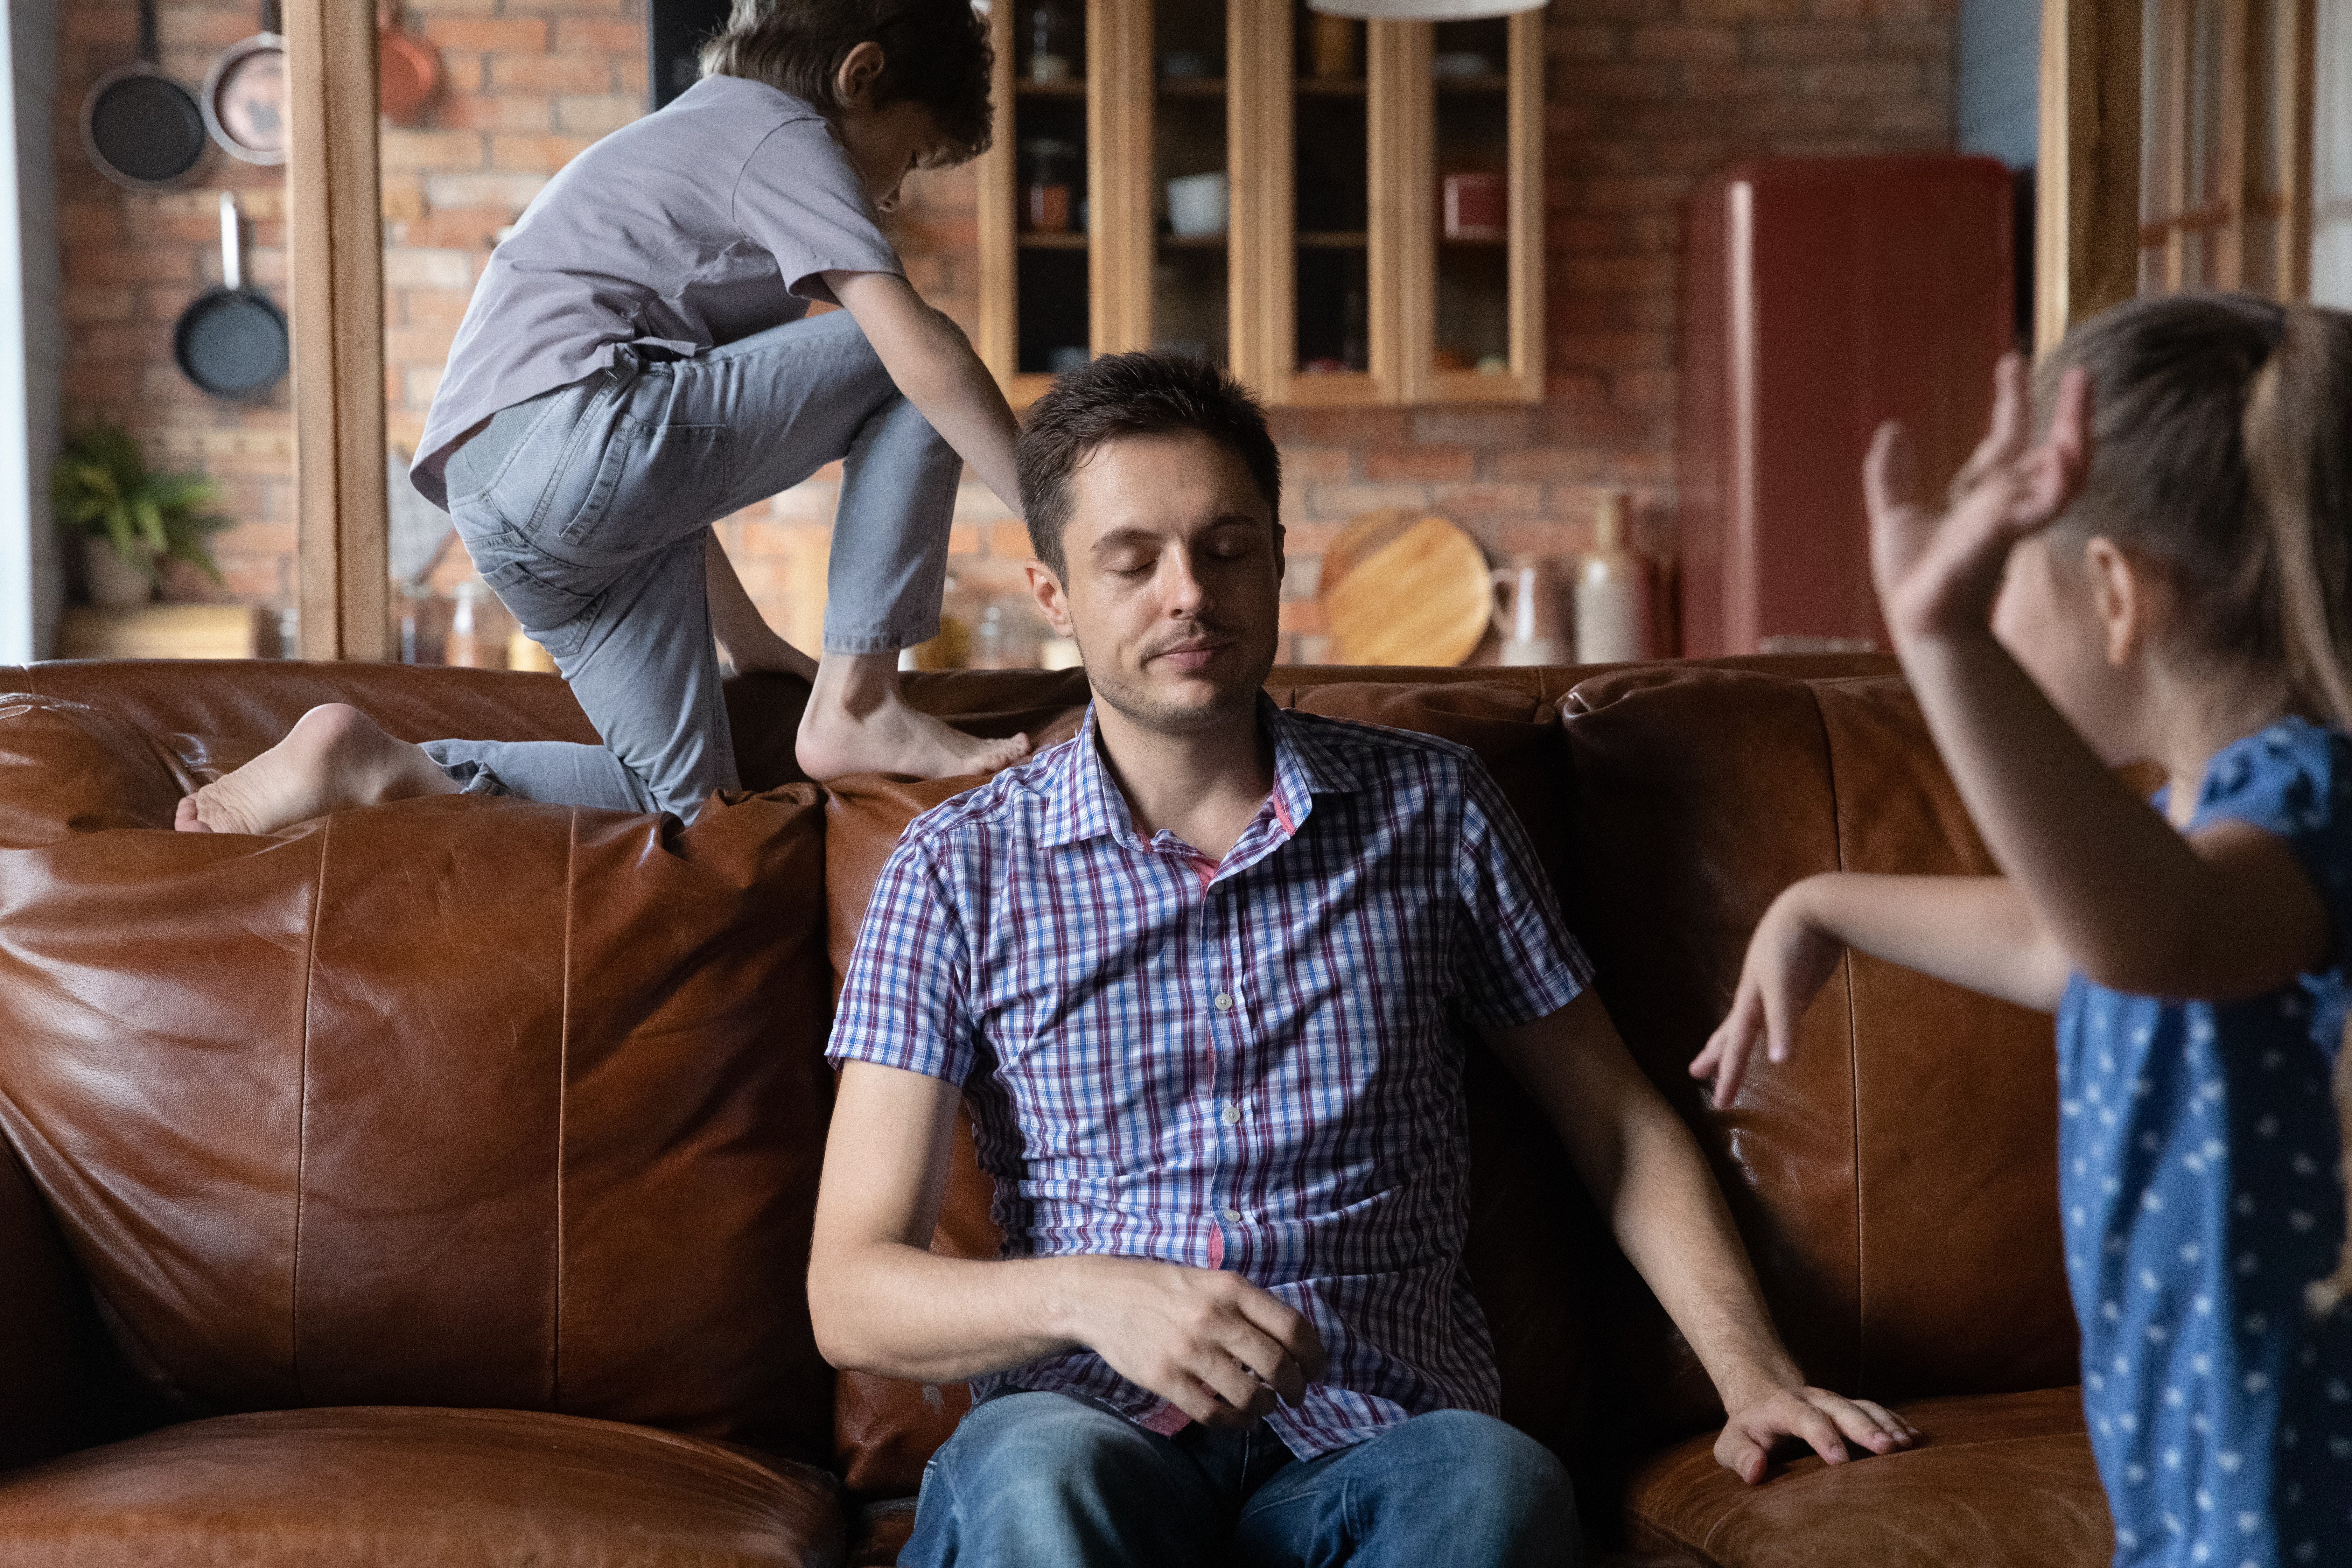 A father feeling exhausted due to his kids making noise in the room | Source: Shutterstock